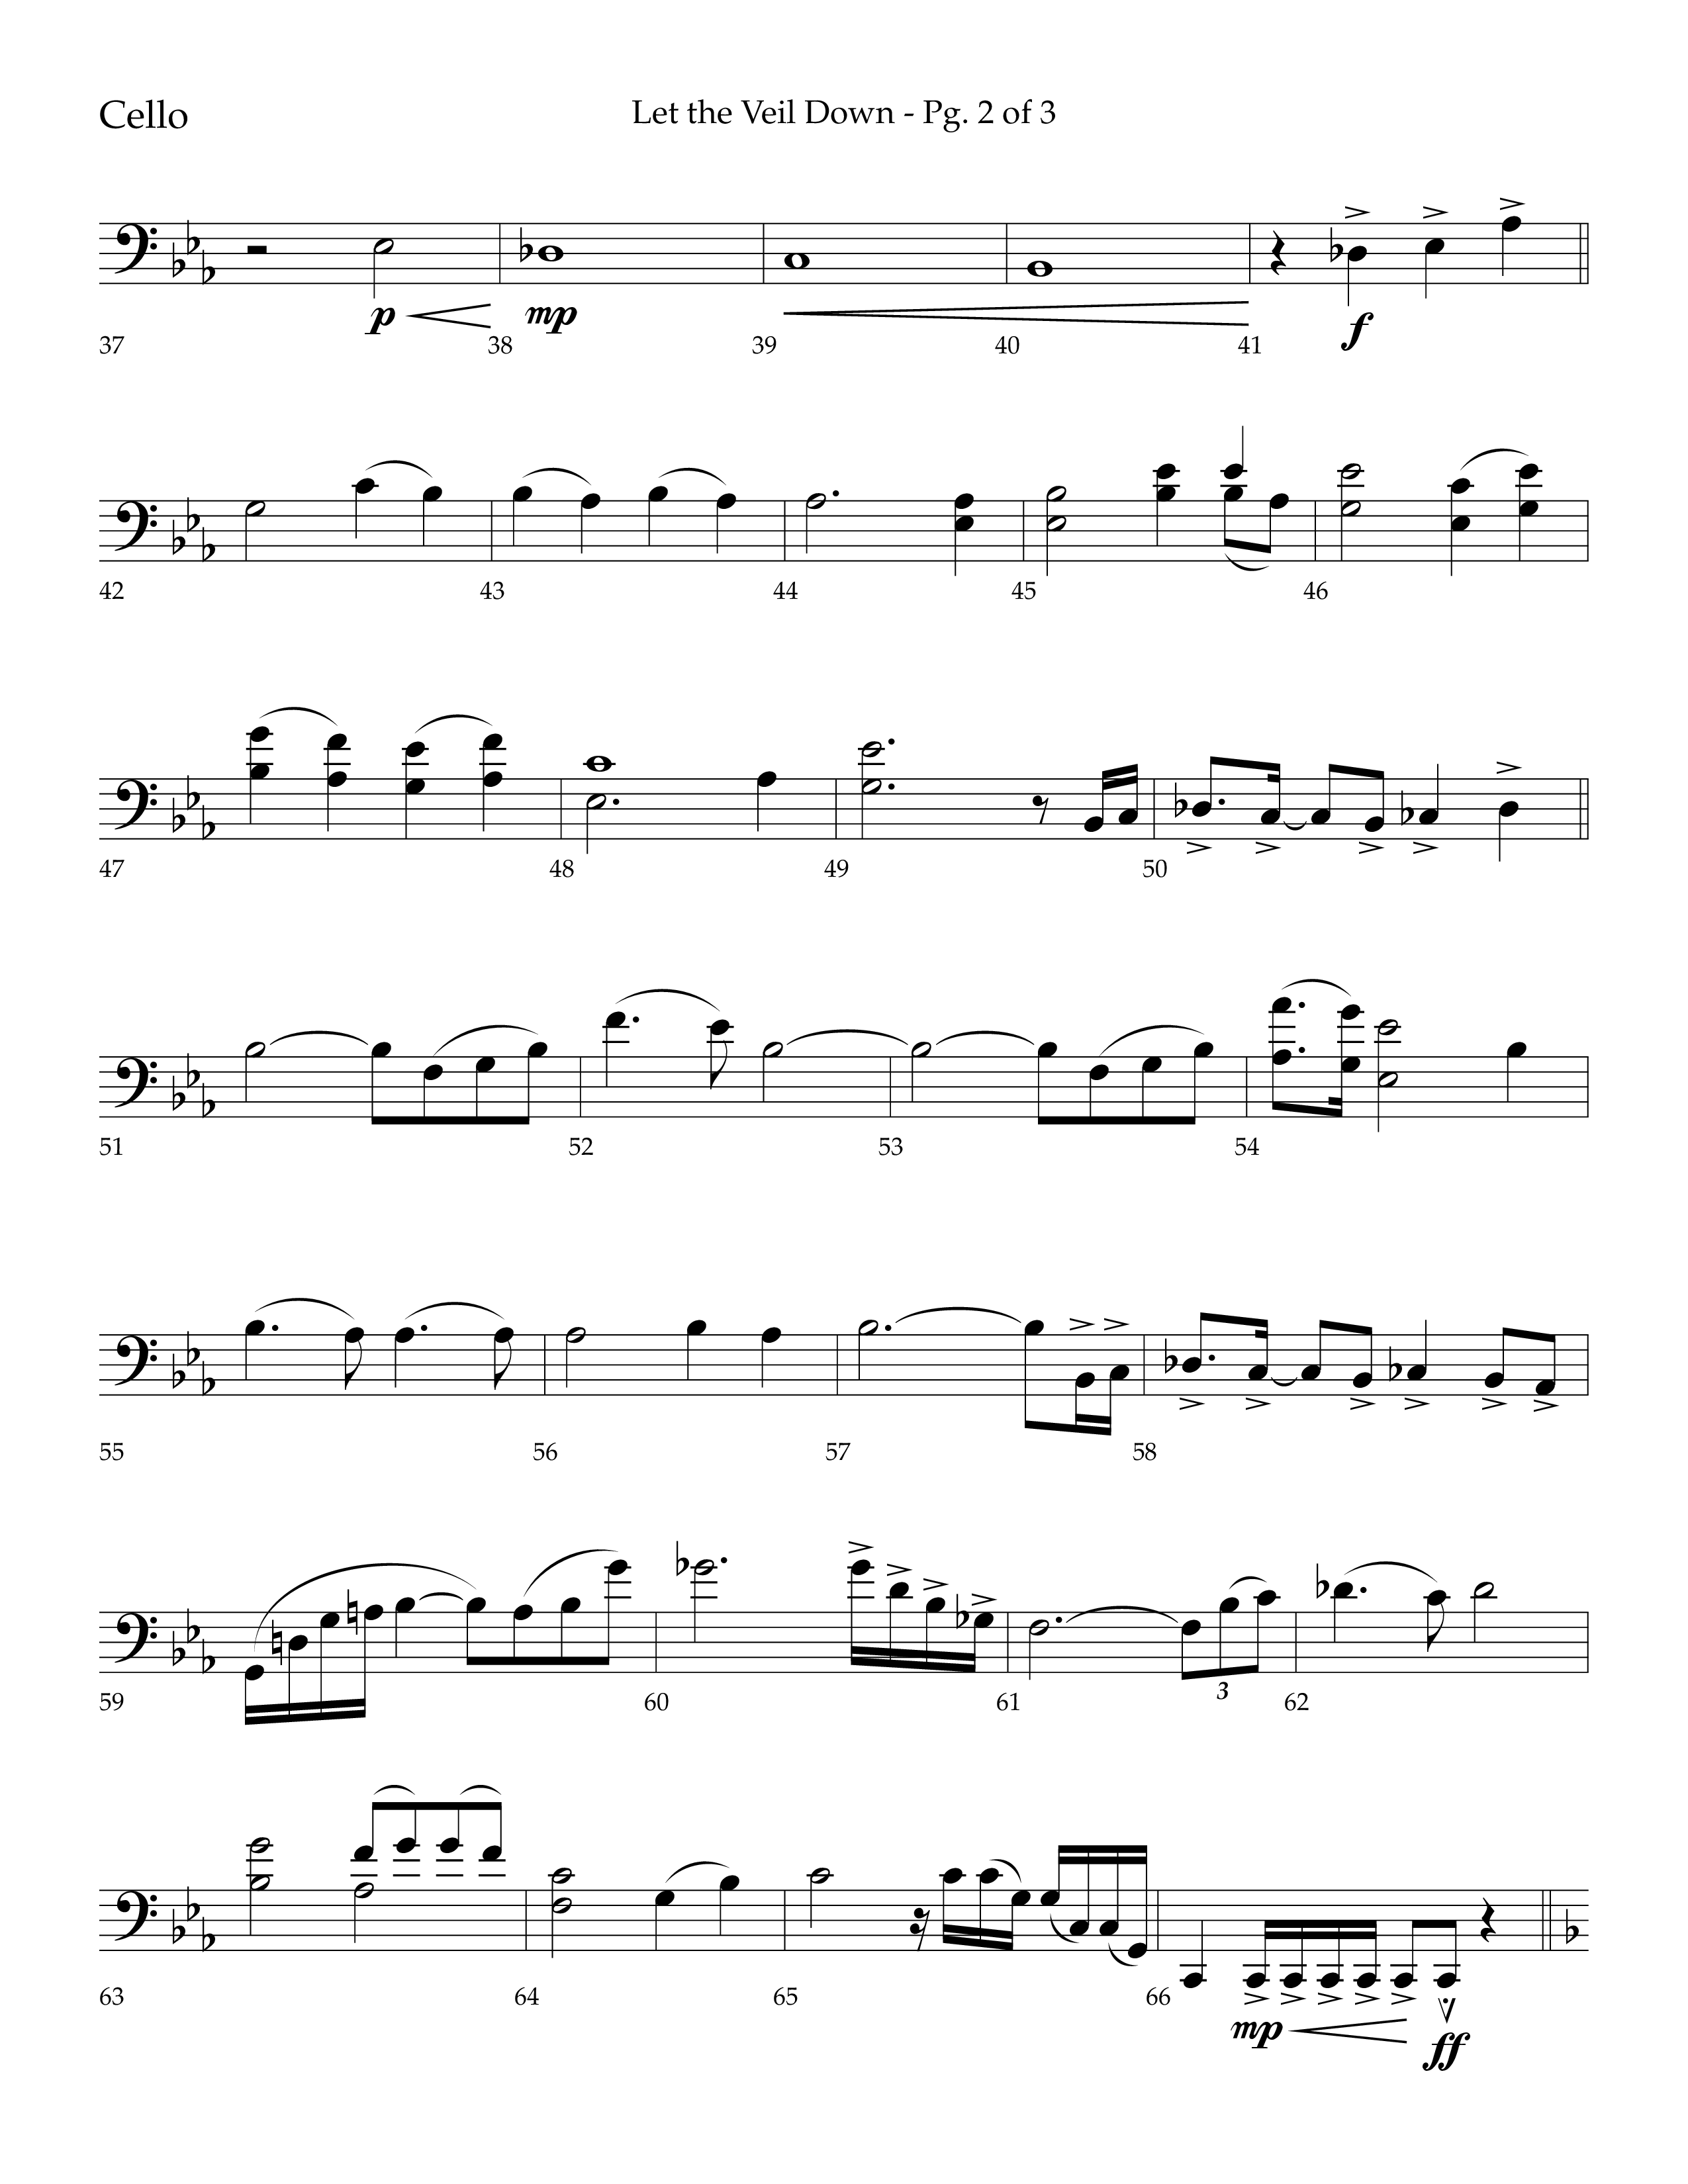 Let The Veil Down with I Exalt Thee (Choral Anthem SATB) Cello (Lifeway Choral / Arr. Cody McVey)